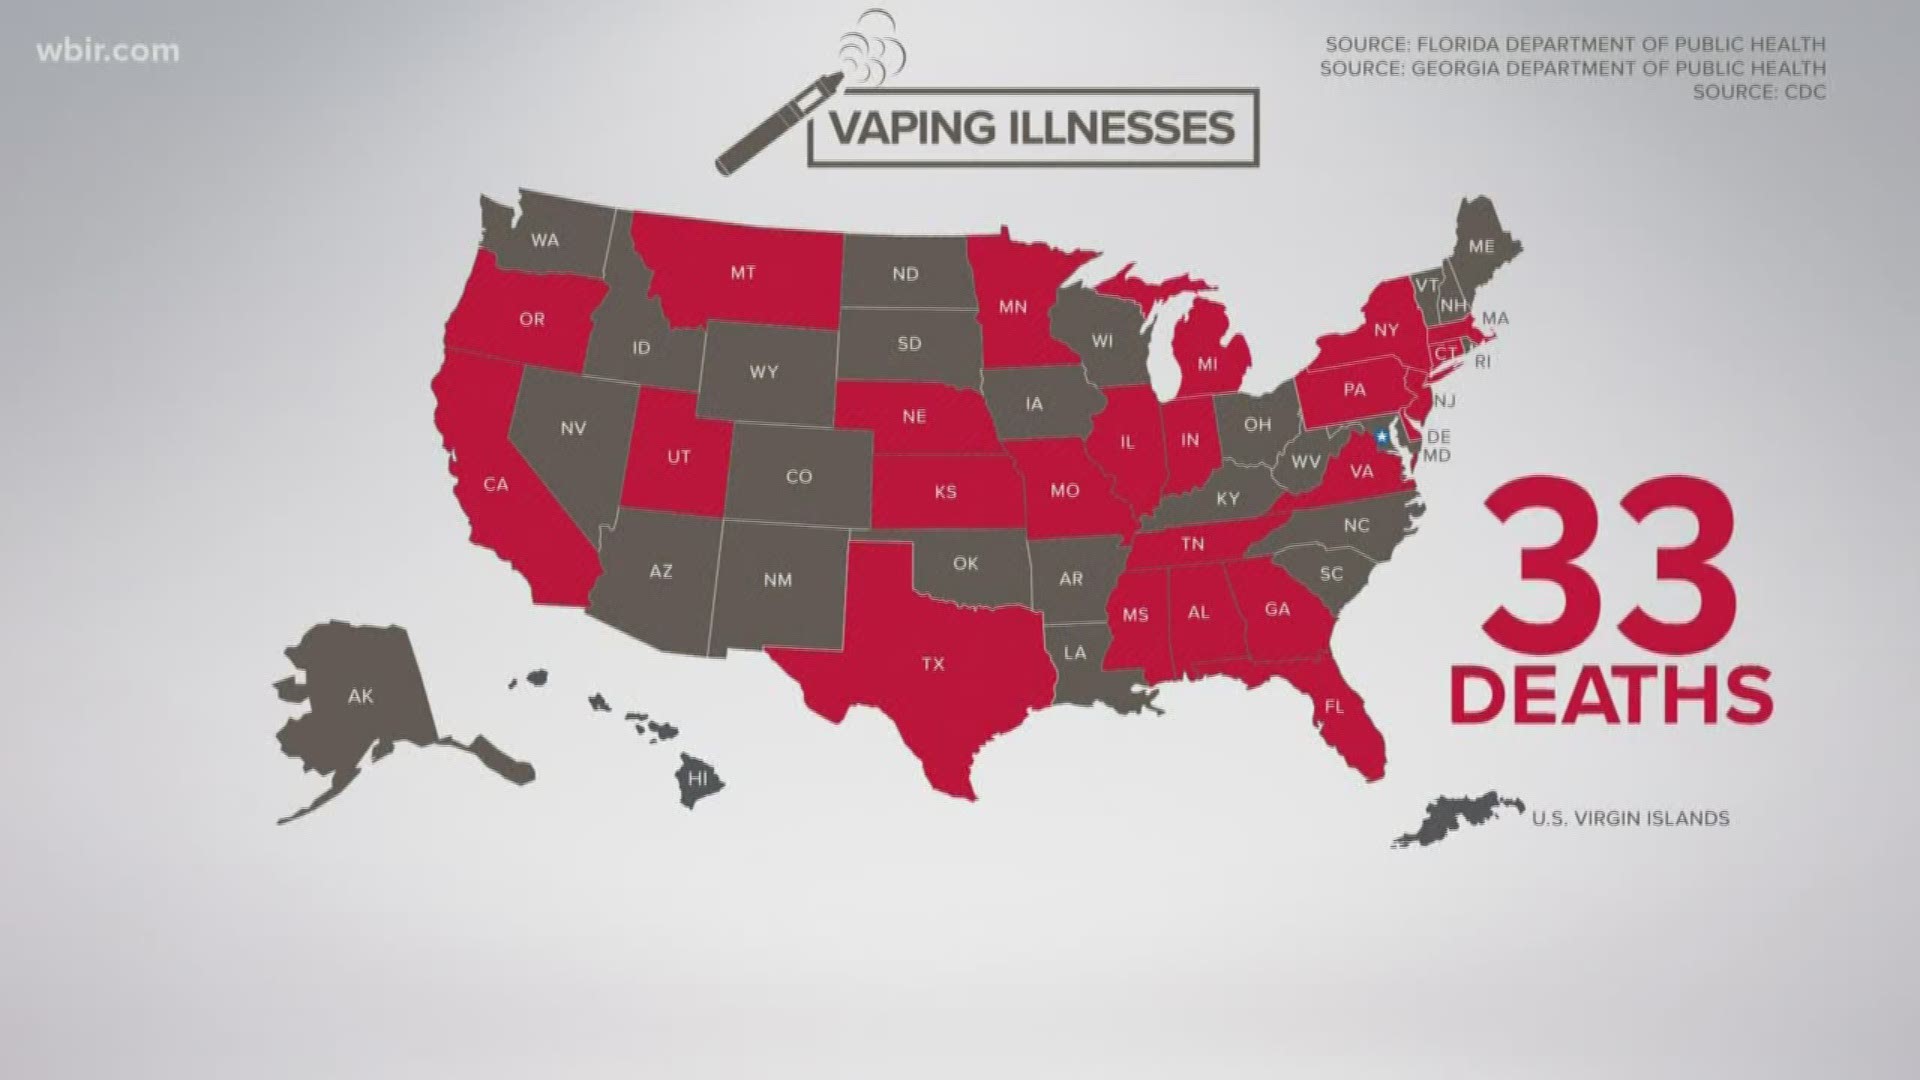 For years a big concern was and still is opioid abuse. Now, leaders around the country are making an extra effort as more vaping-related illnesses and deaths occur.